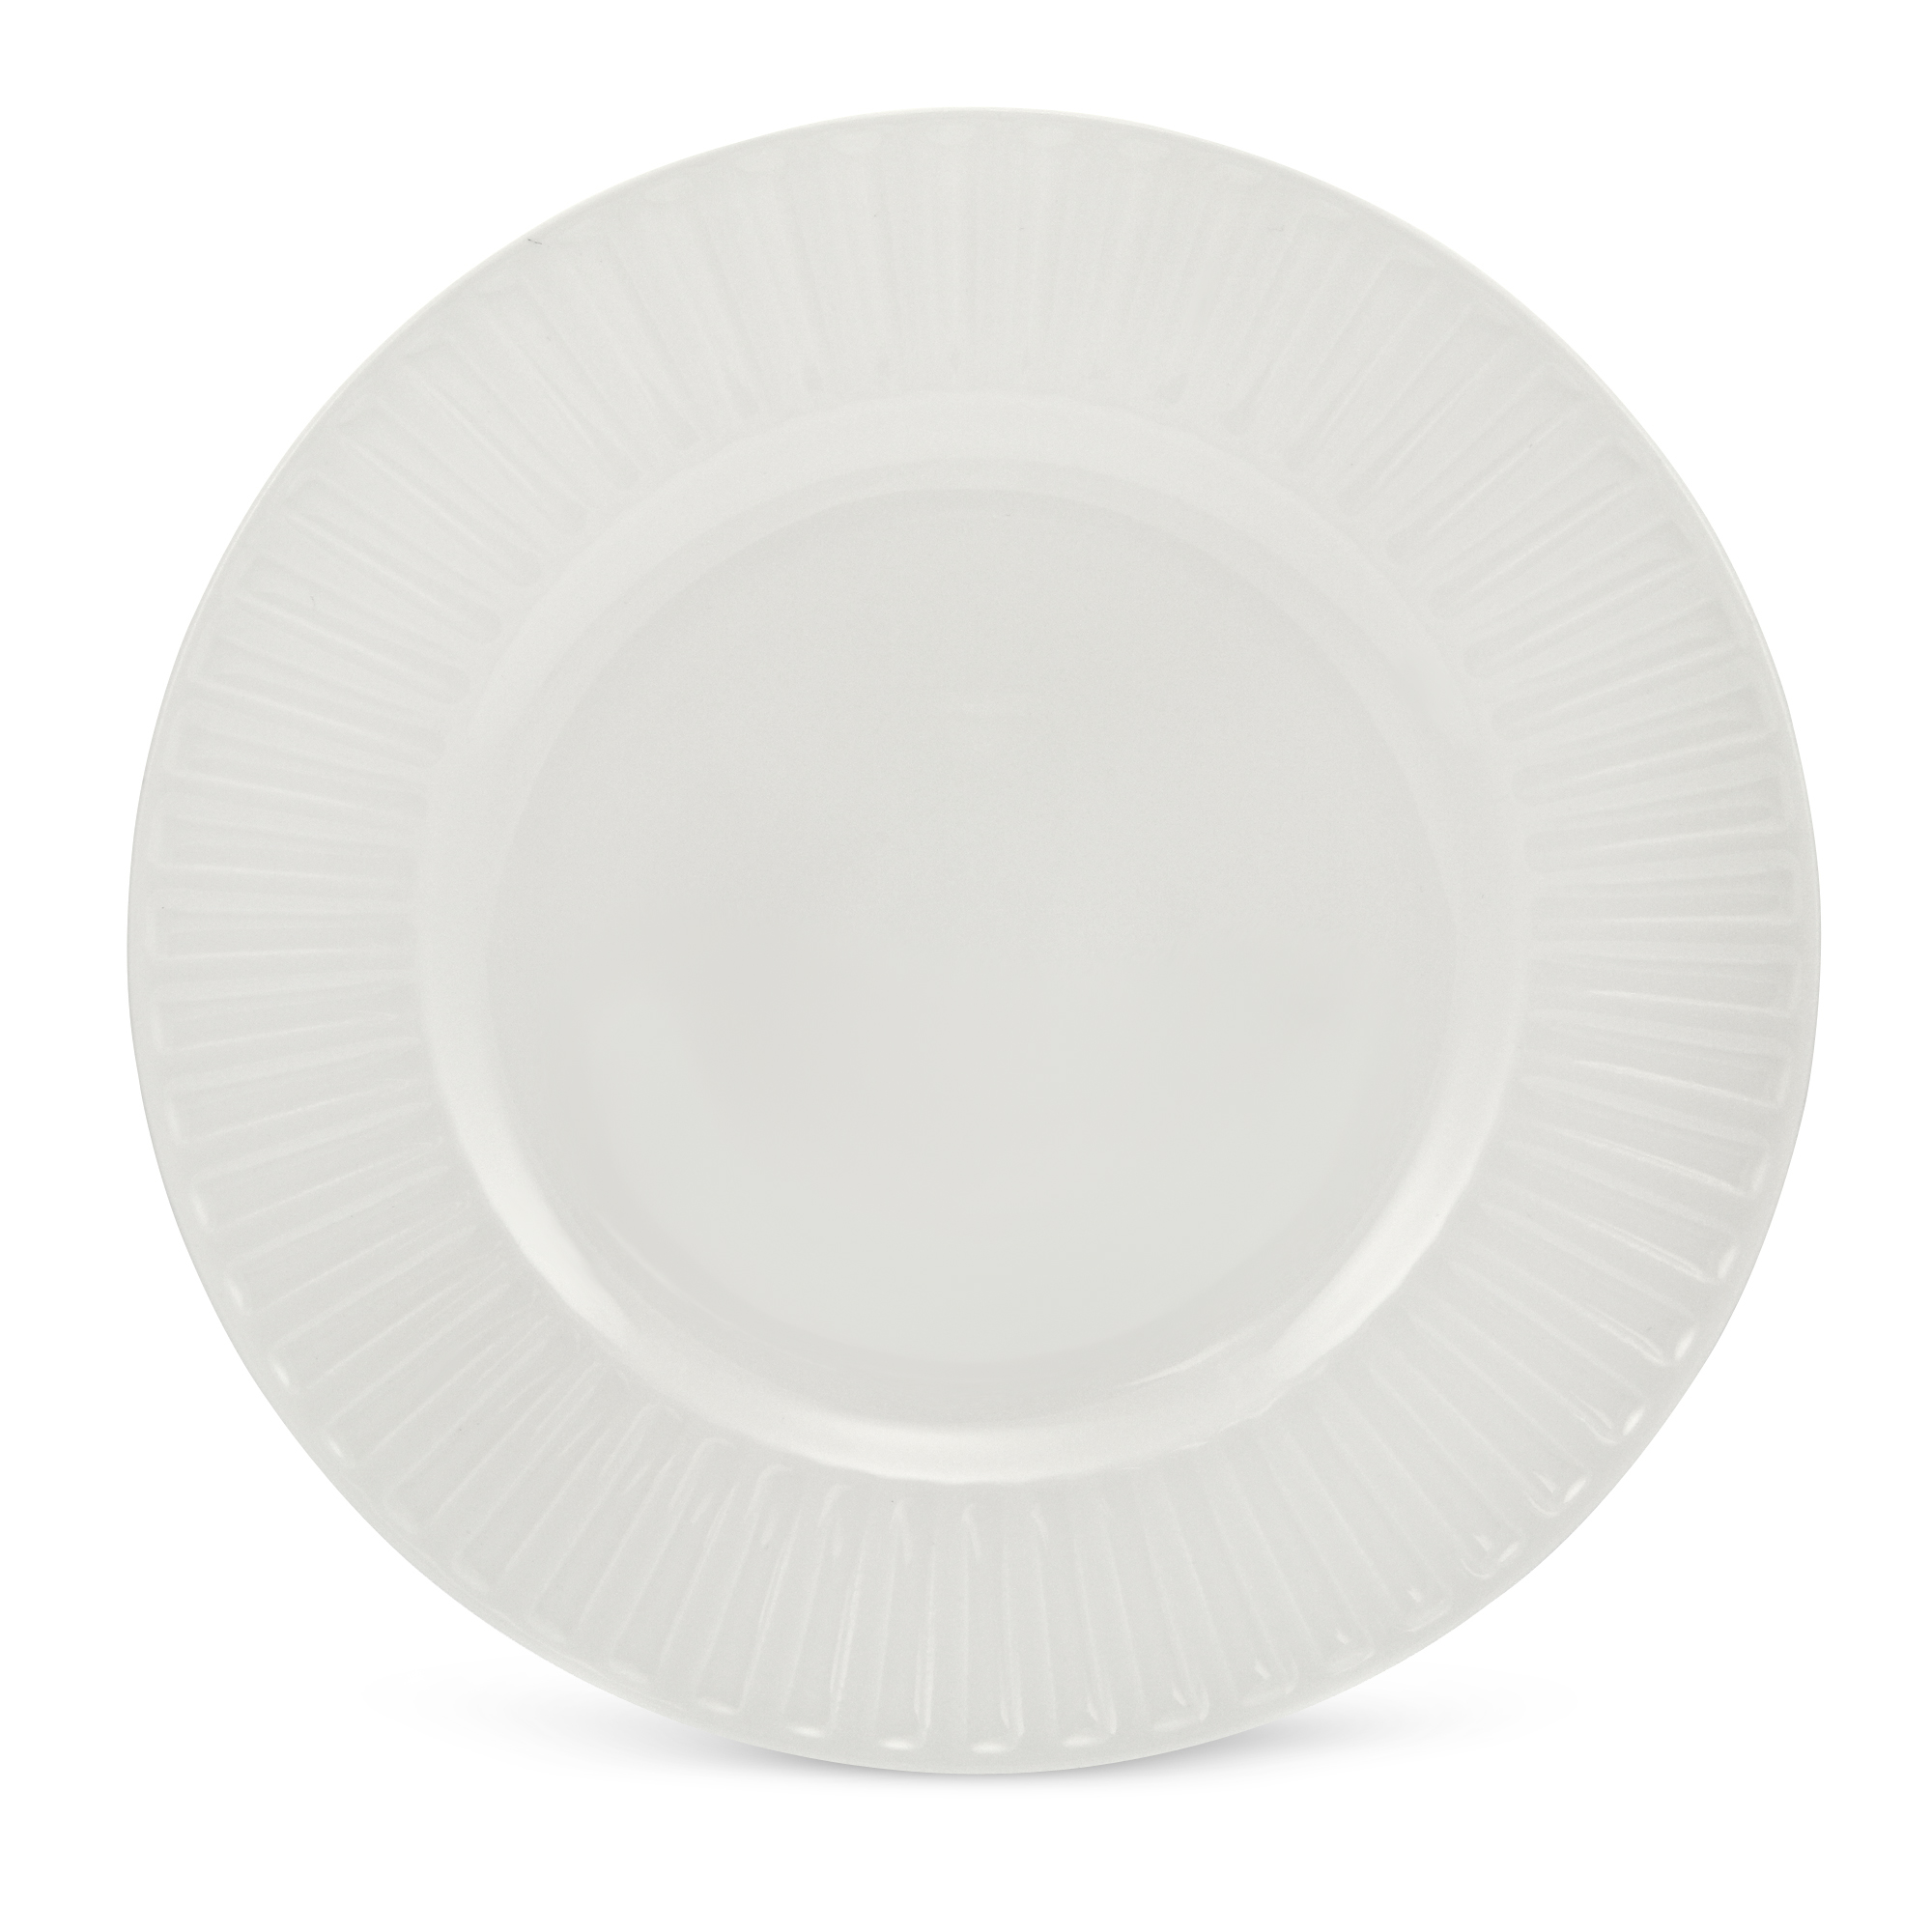 Wedgwood Night and Day Fluted Salad Plate | Borsheims